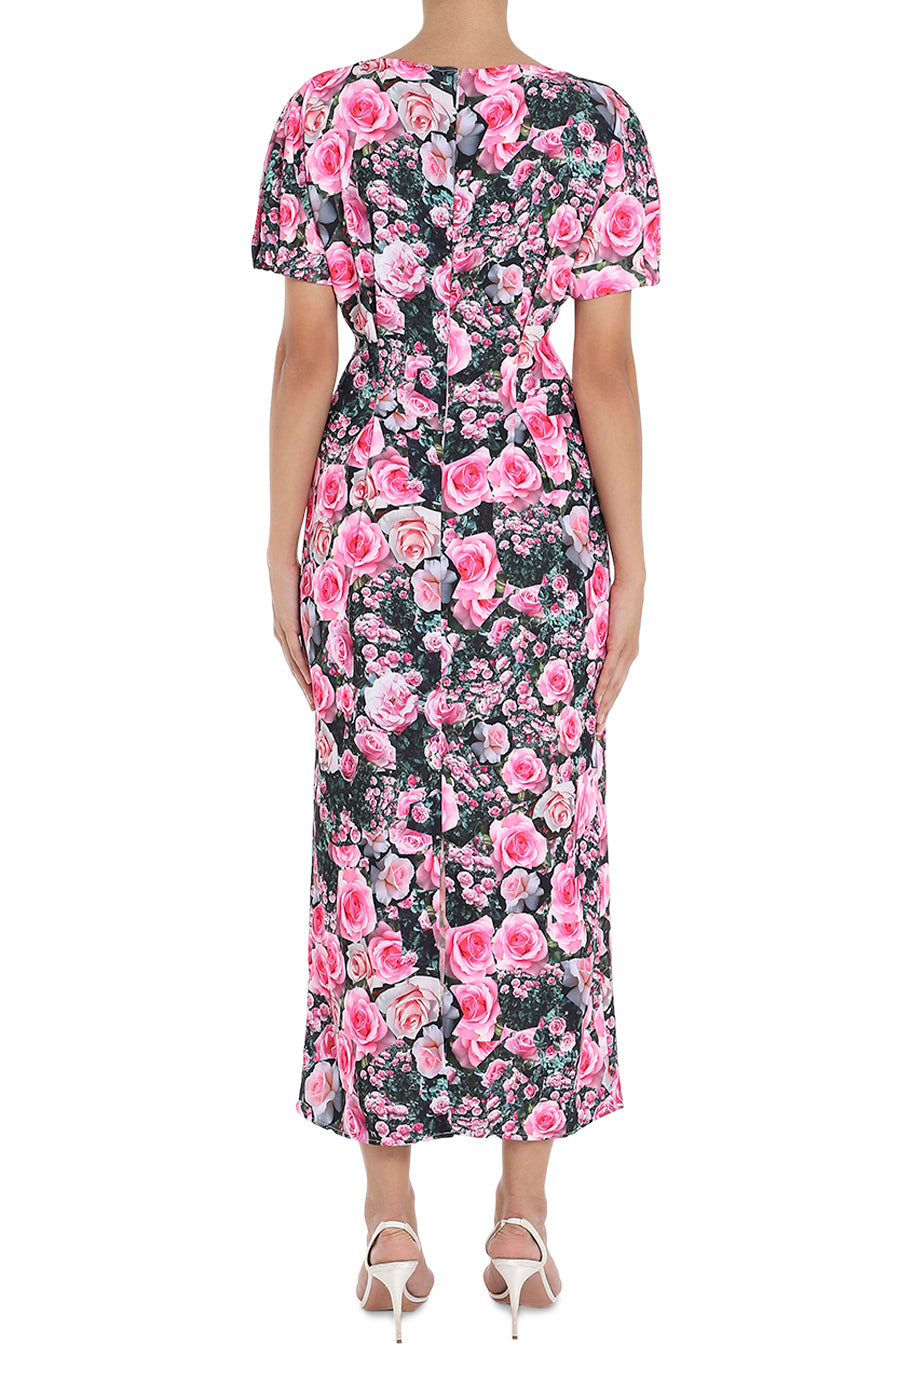 Christopher Kane The Rose Garden Midi Dress in Pink. Back view. Shop from Etoile La Boutique.